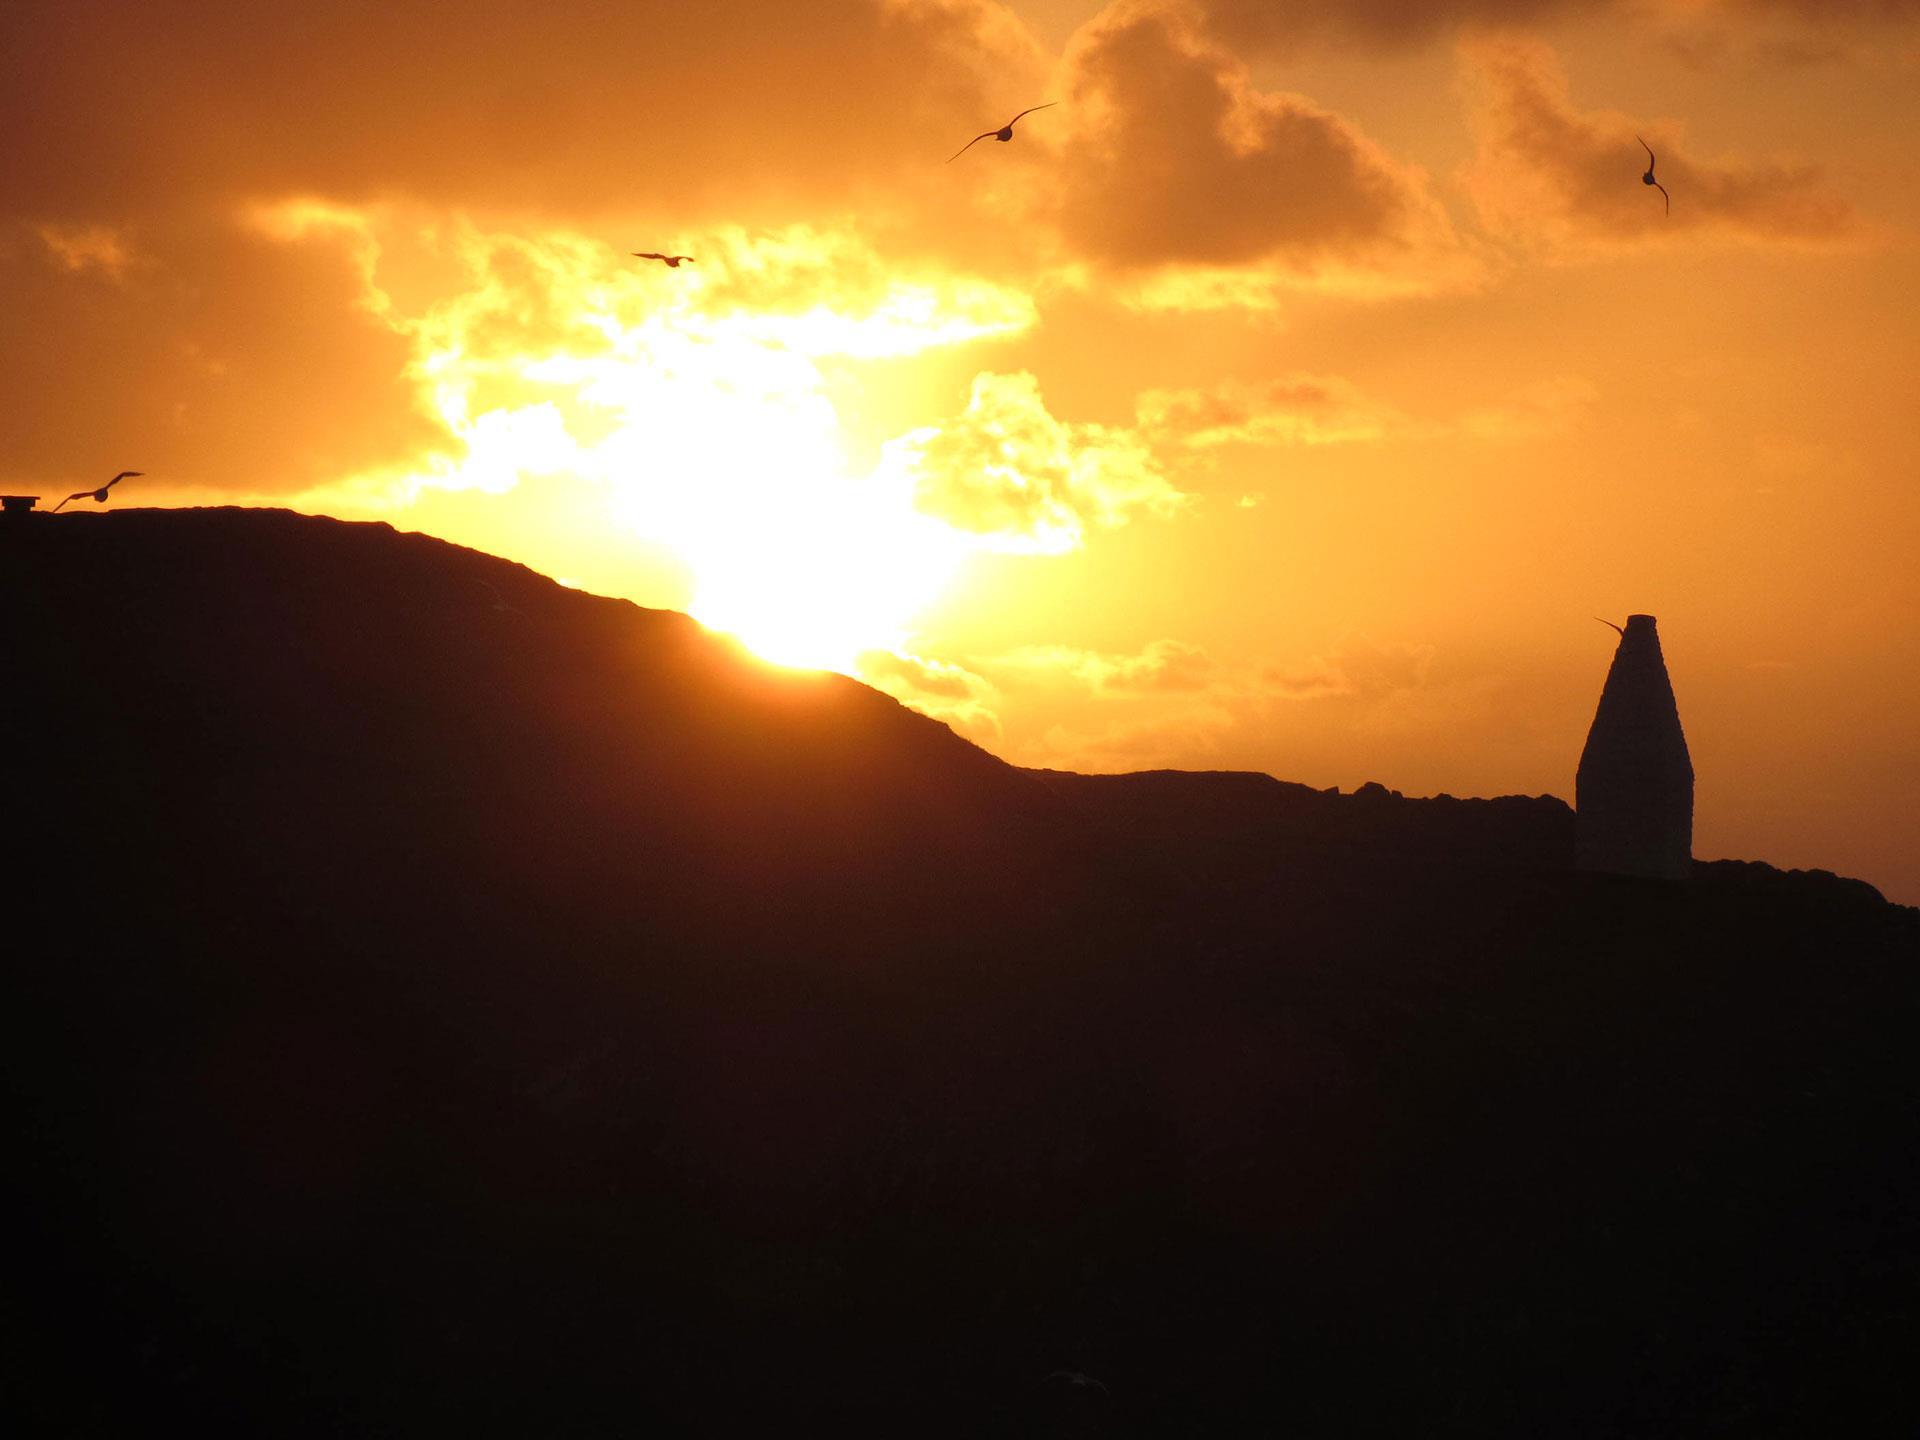 Sunset and seagulls in Porthgain